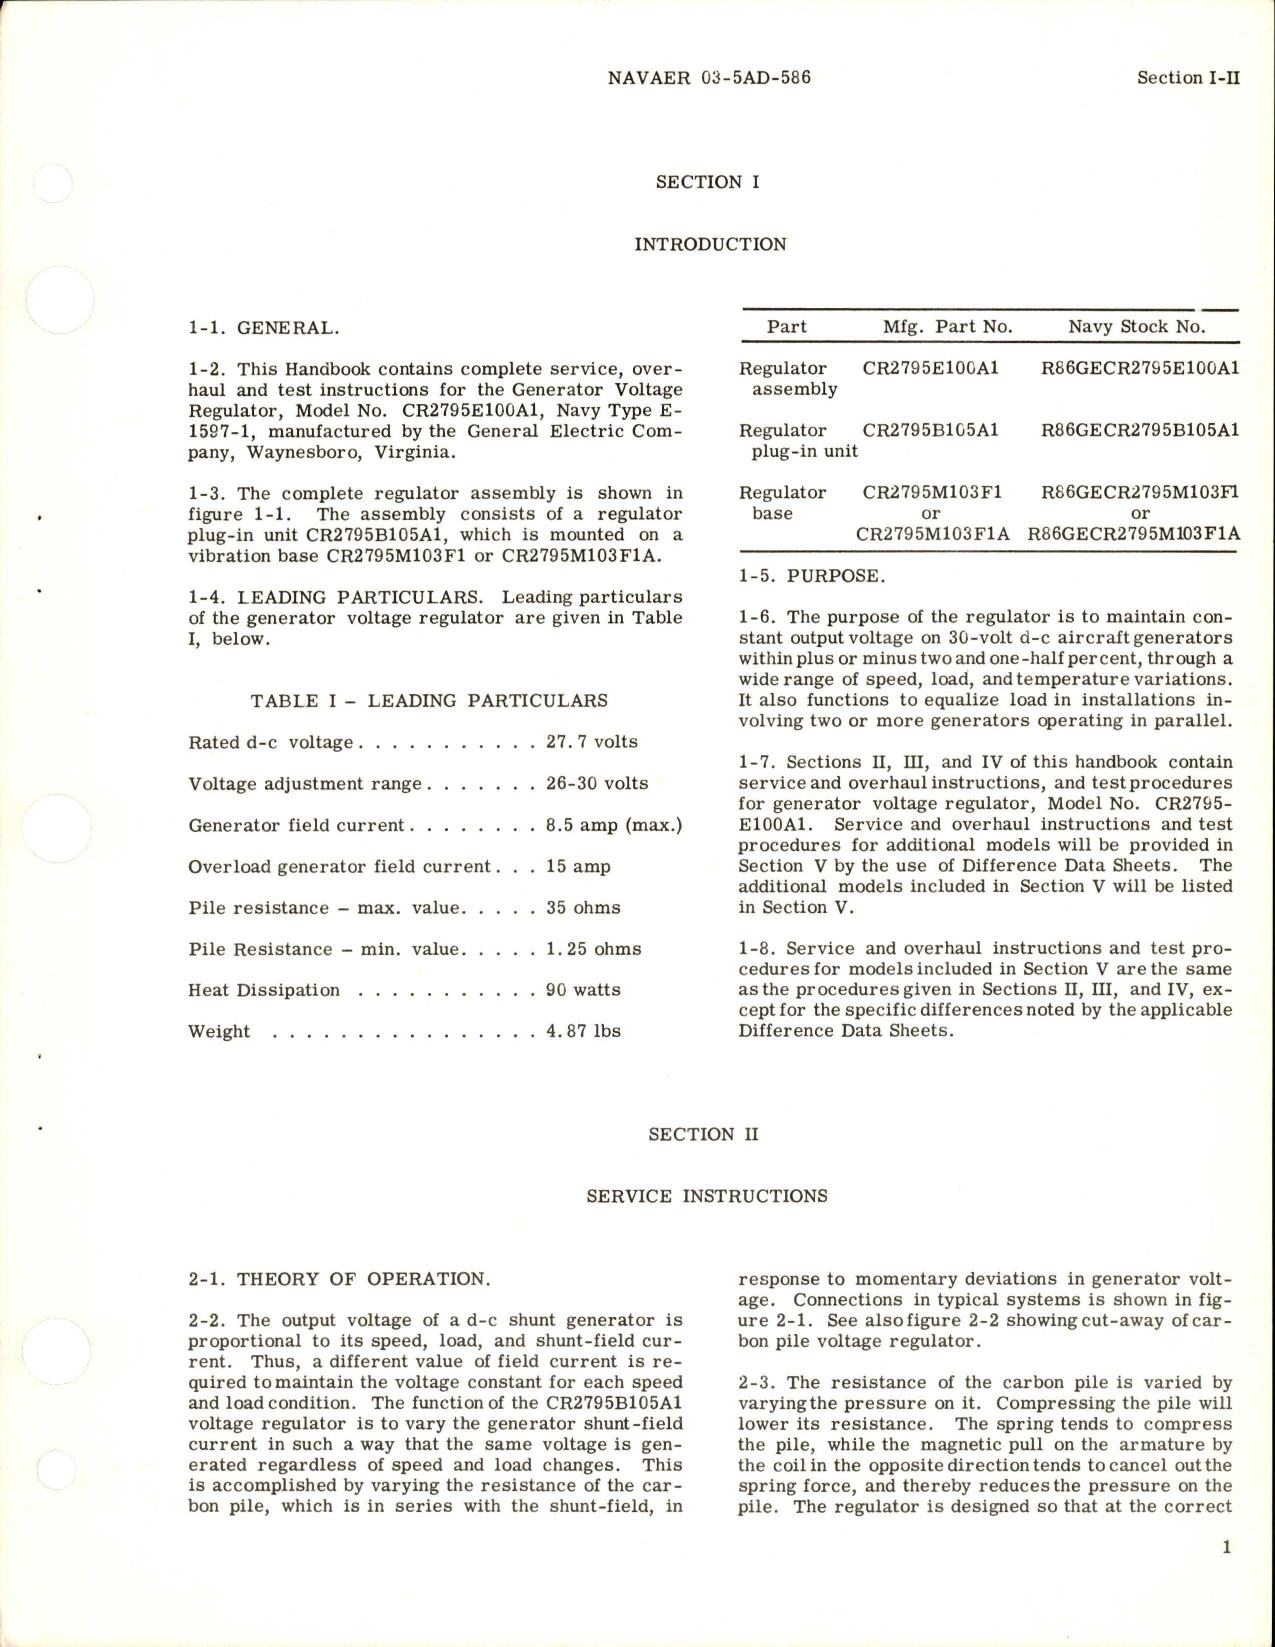 Sample page 5 from AirCorps Library document: Service and Overhaul Instructions for Generator Voltage Regulator - Model CR2795E100A1